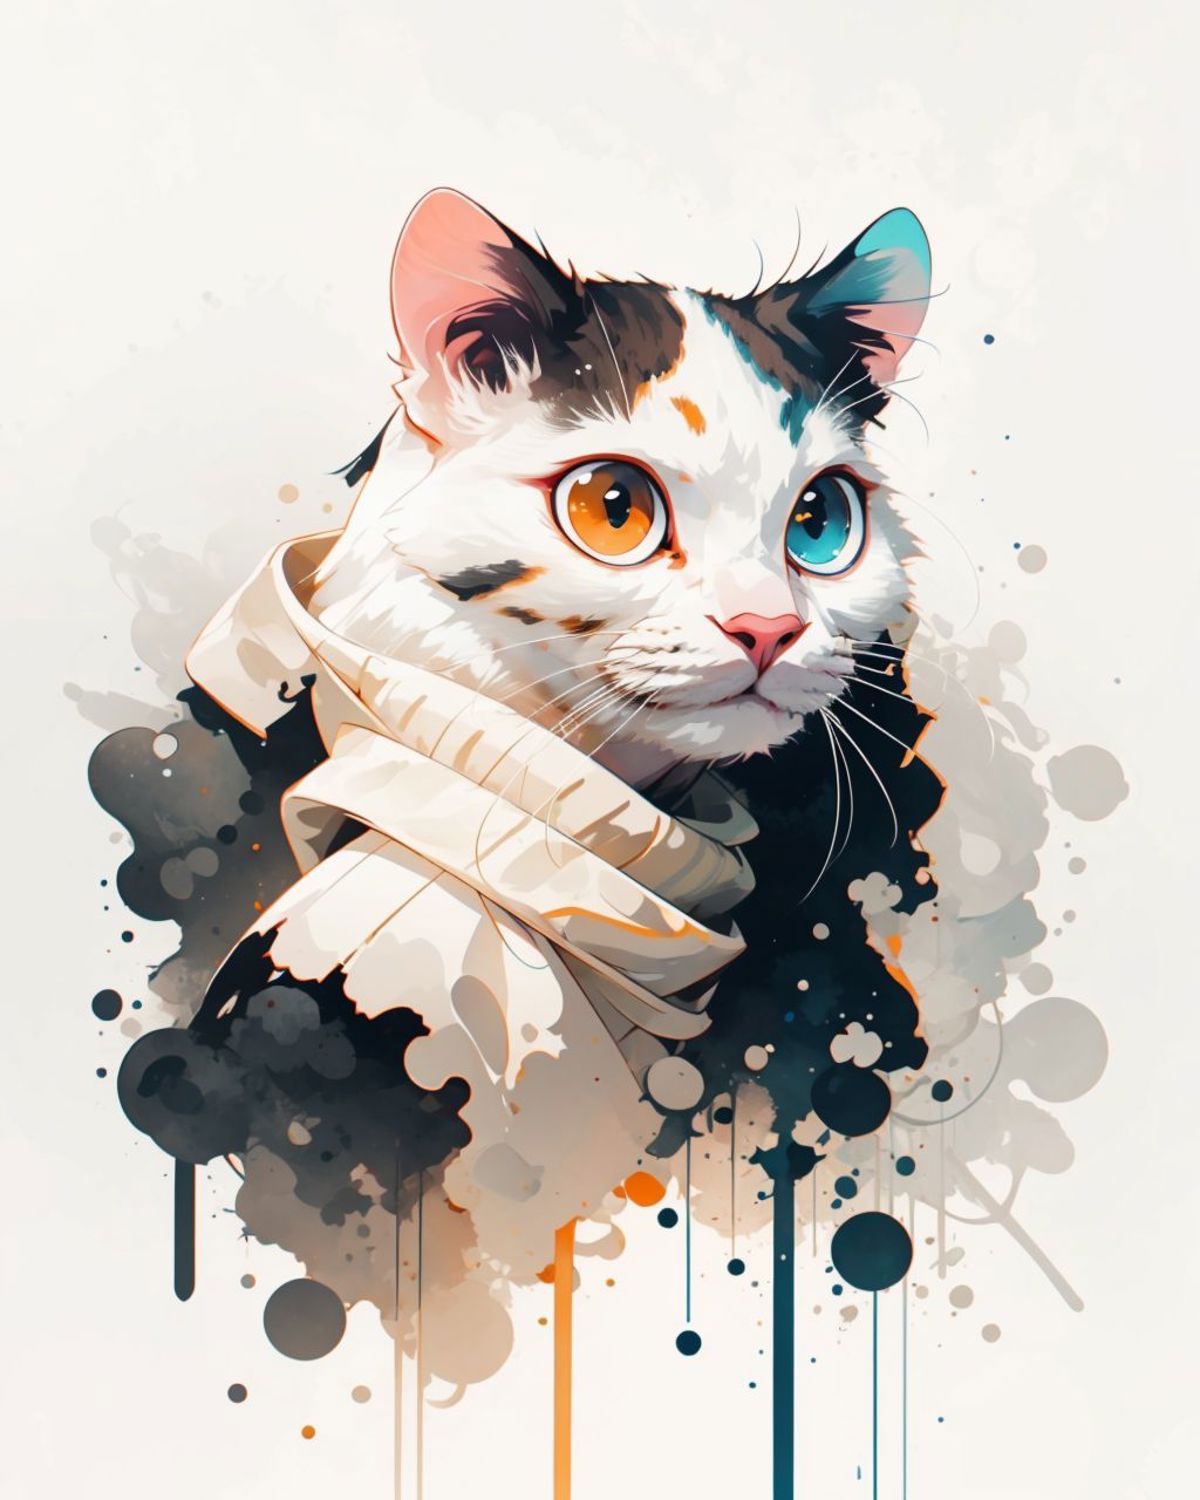 A white cat with a blue eye, wearing a white hoodie, in a colorful and artistic scene.